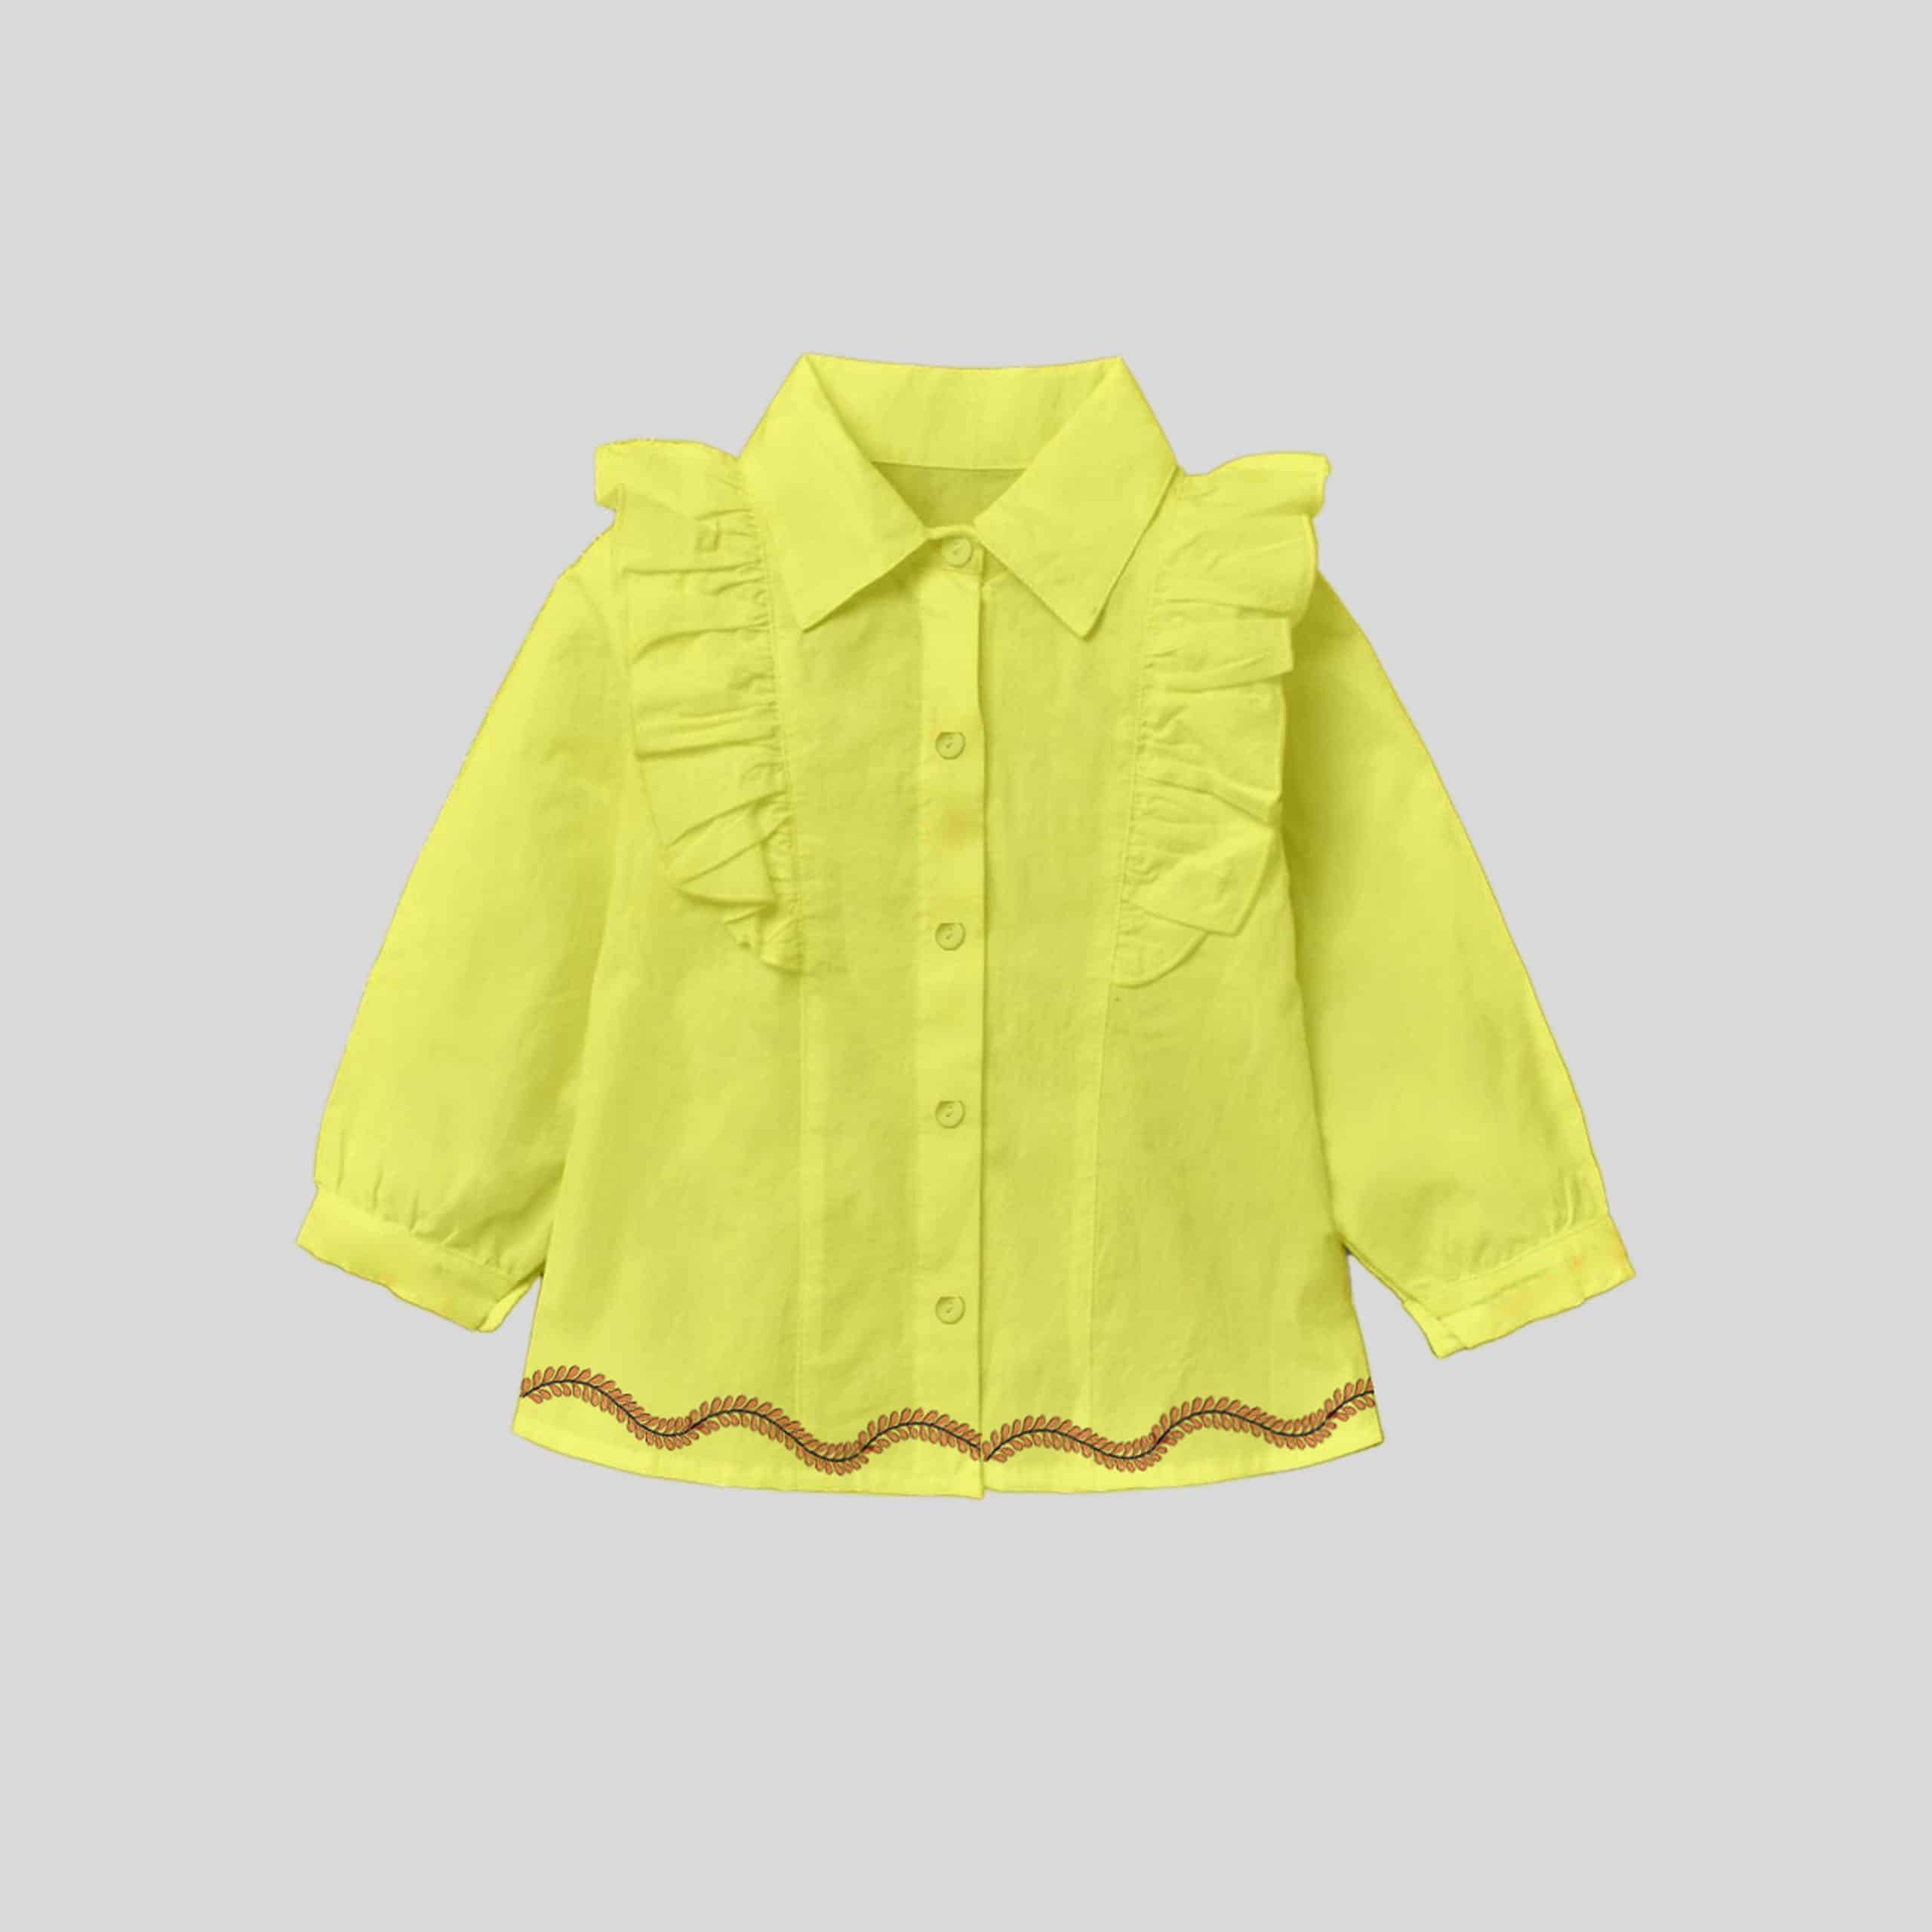 Girls Yellow Frill Top with Print - RKFCW331